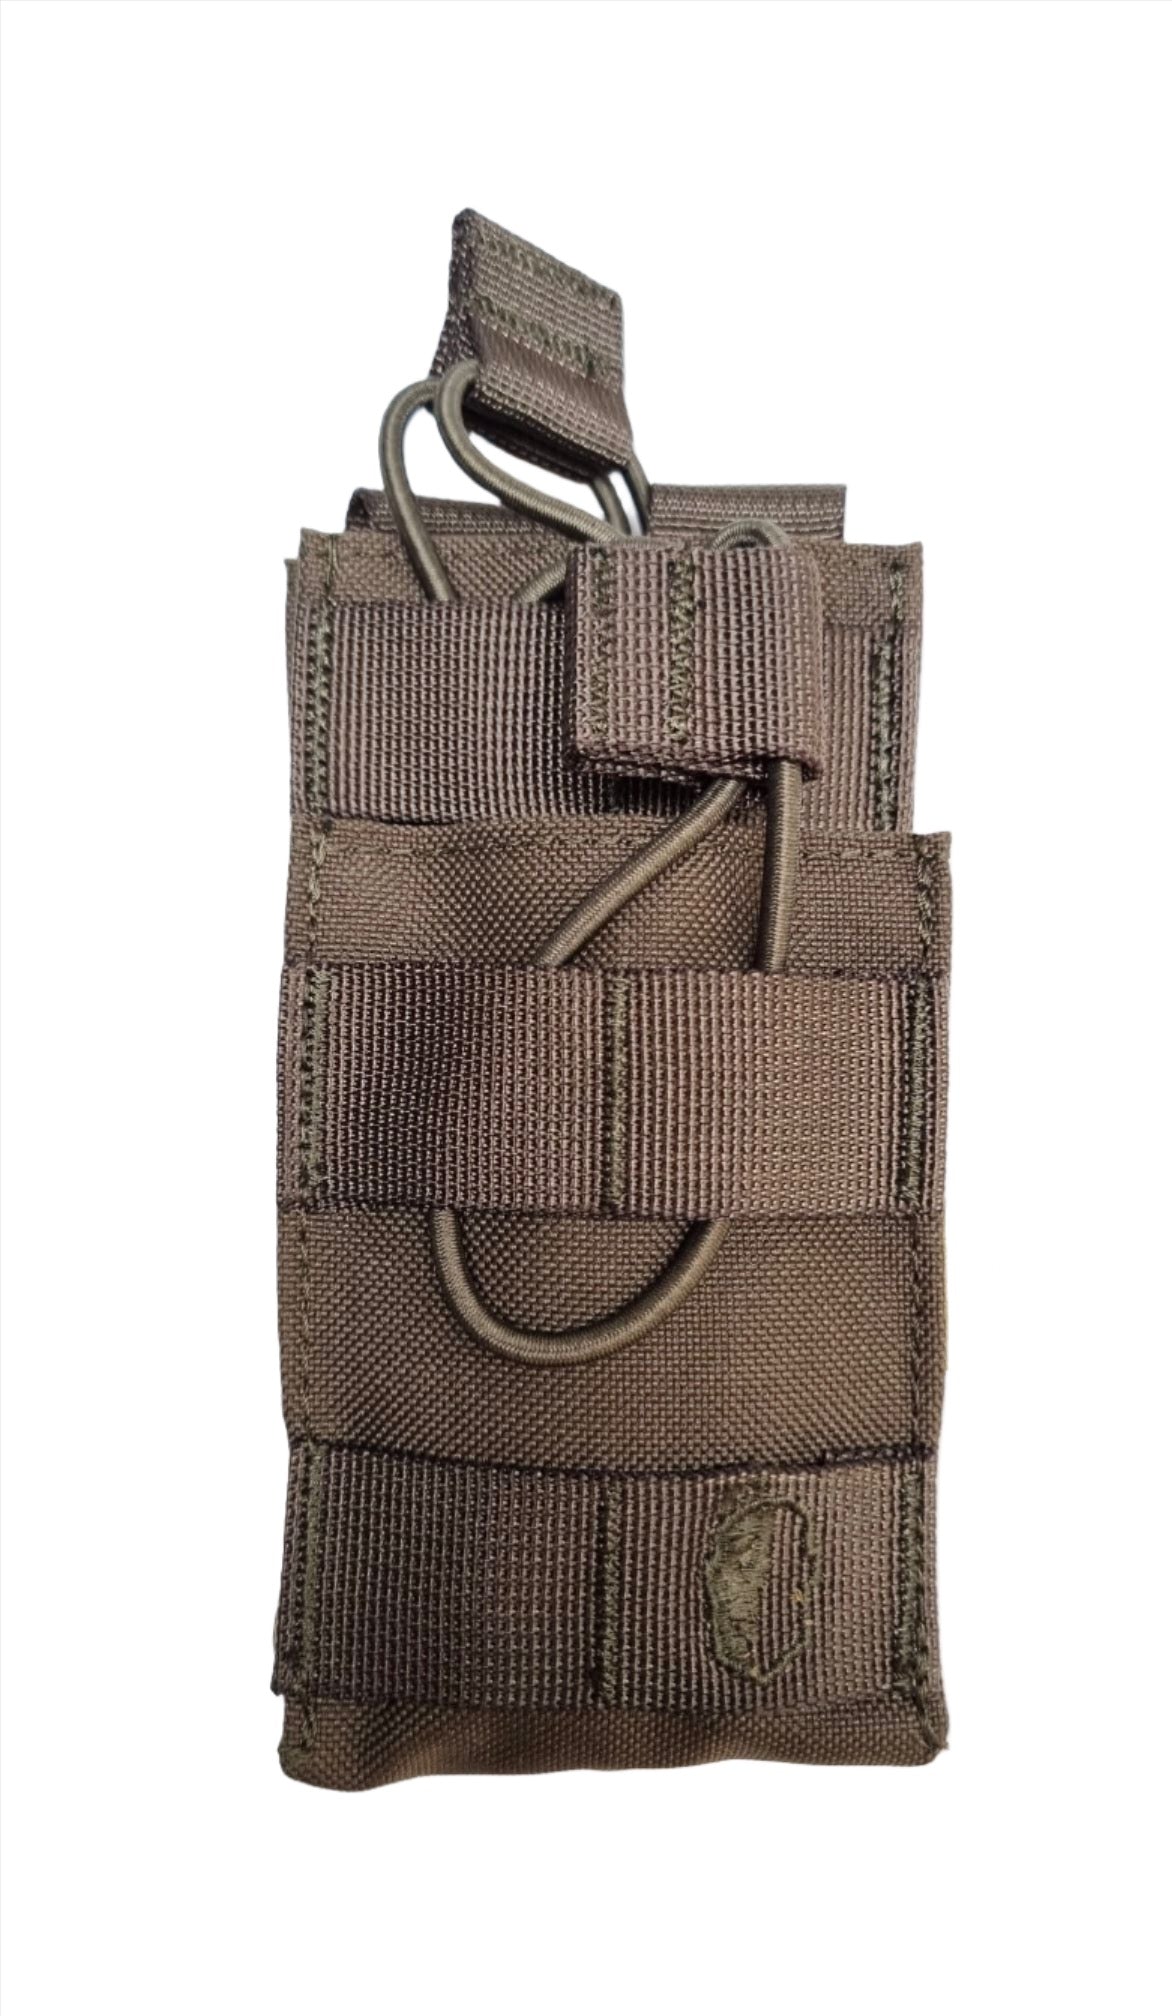 SHS - 1090 STACKER OPEN-TOP MAG POUCH SINGLE COLOUR ARMY GREEN